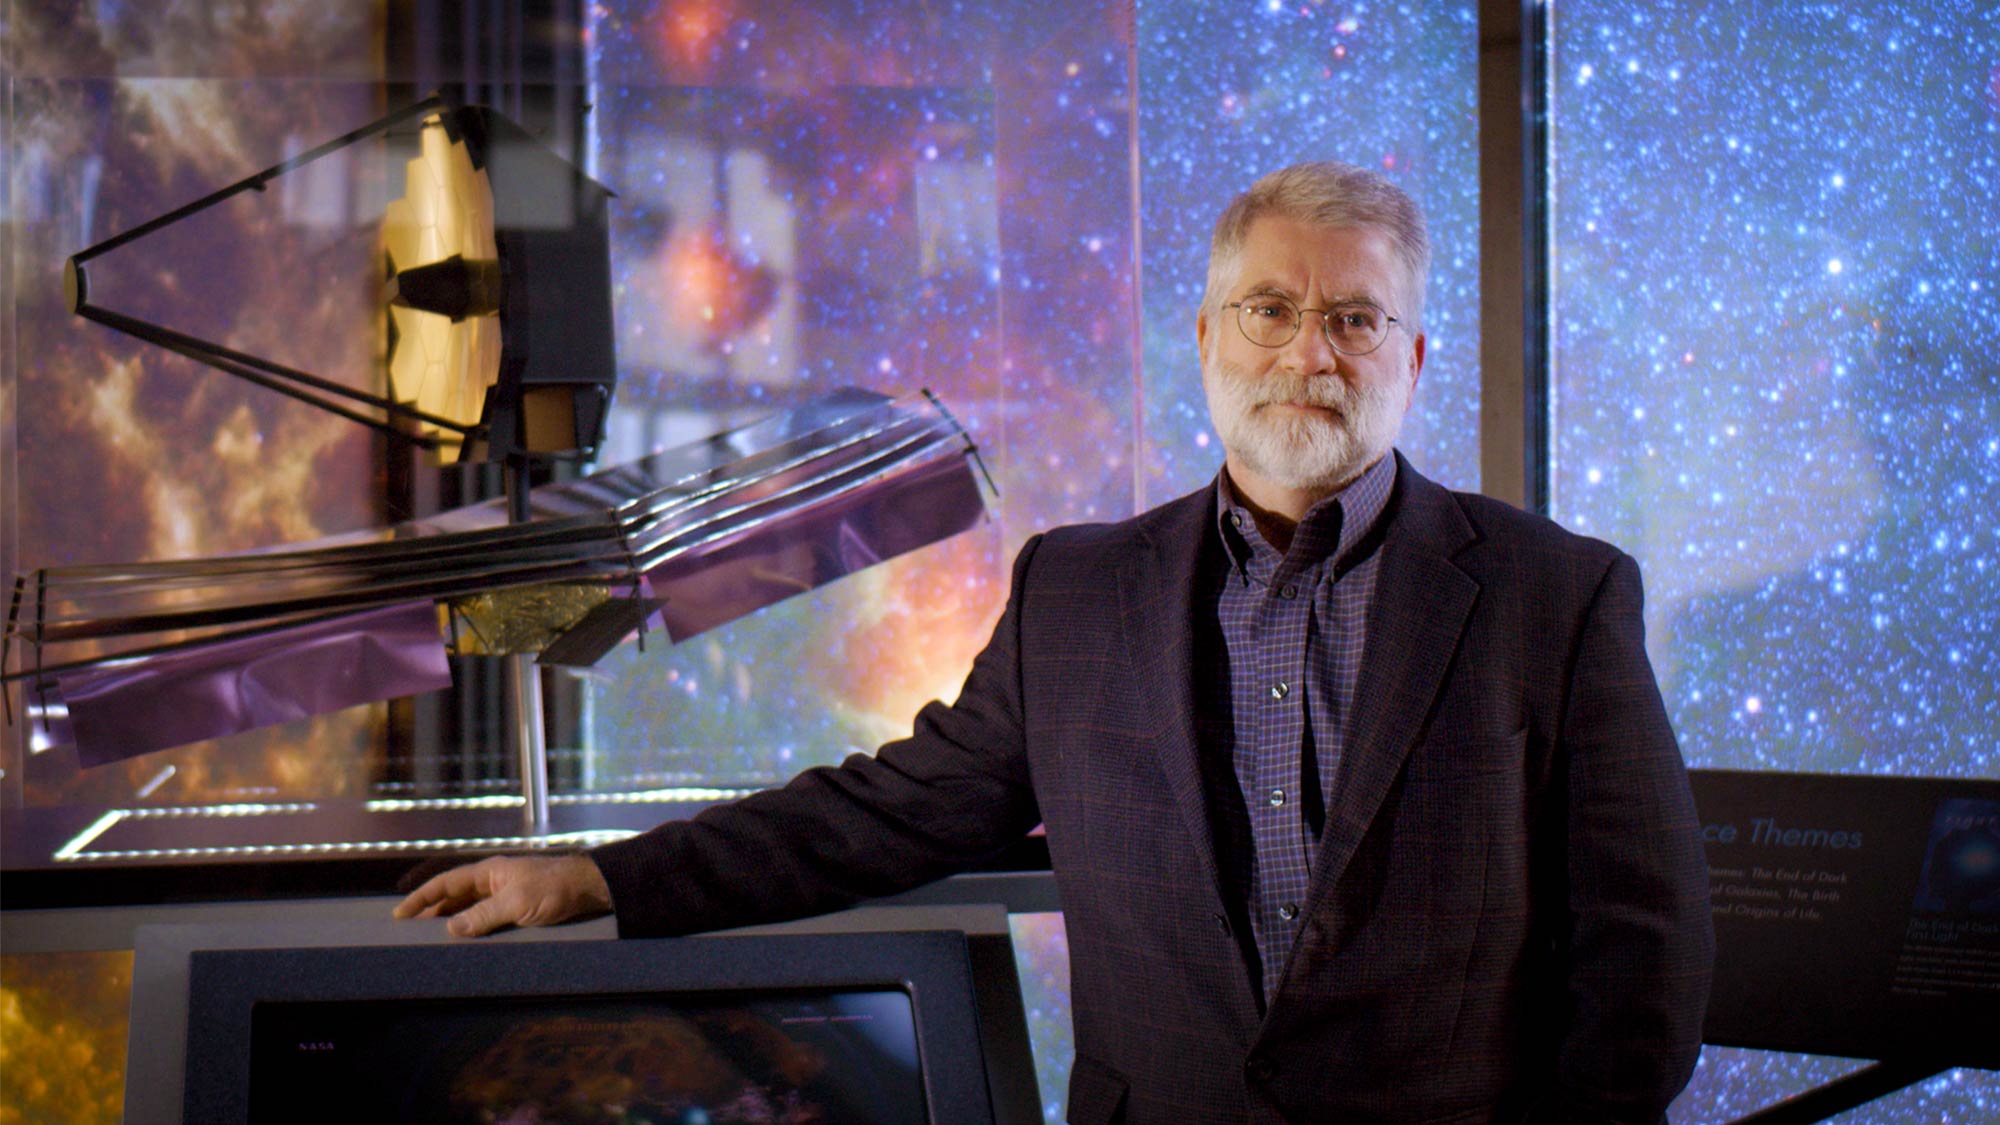 This image shows Michael Menzel standing in front of a starry backdrop and with a model of the JWST.